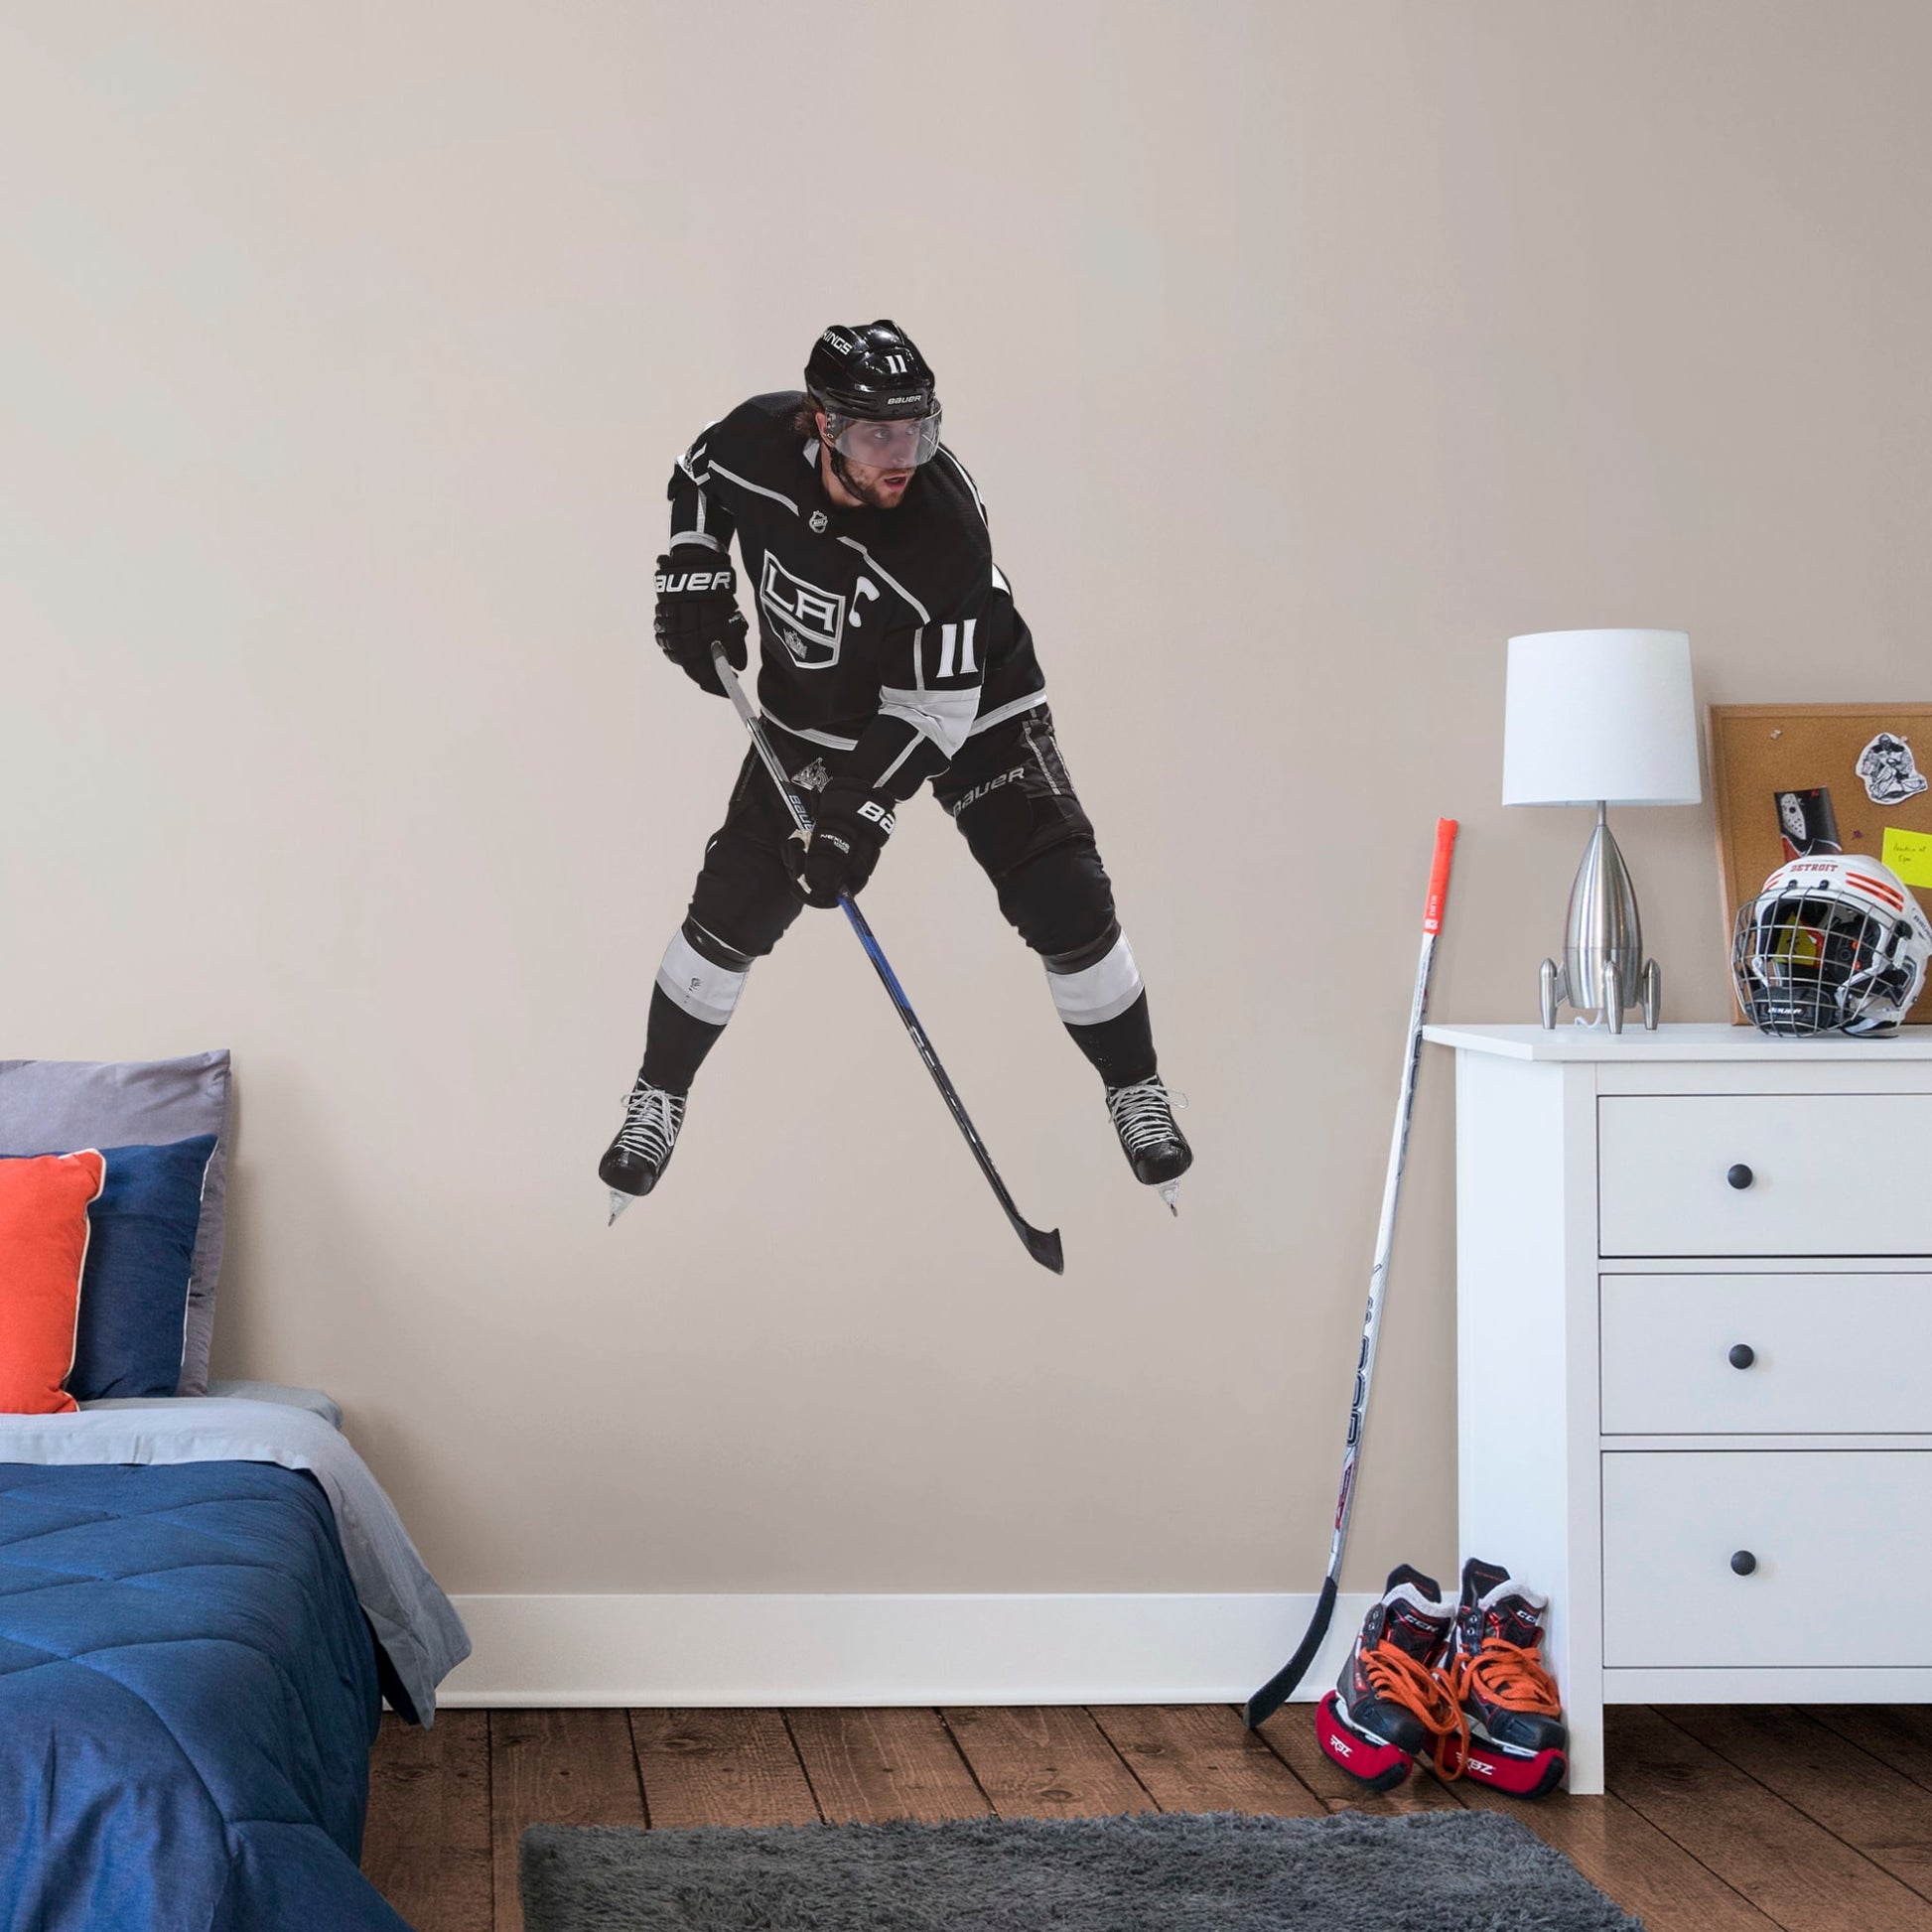 Large Athlete + 2 Decals (10"W x 17"H) NHL fans and Kings fanatics alike love Anze Kopitar, the clutch captain from Los Angeles, and now you can bring his skill to life in your own home! Seen here in his home uniform in action on the ice, this durable, bold, and removable wall decal will make the perfect addition to your bedroom, office, fan room, or any spot in your house! Let's Go Kings!